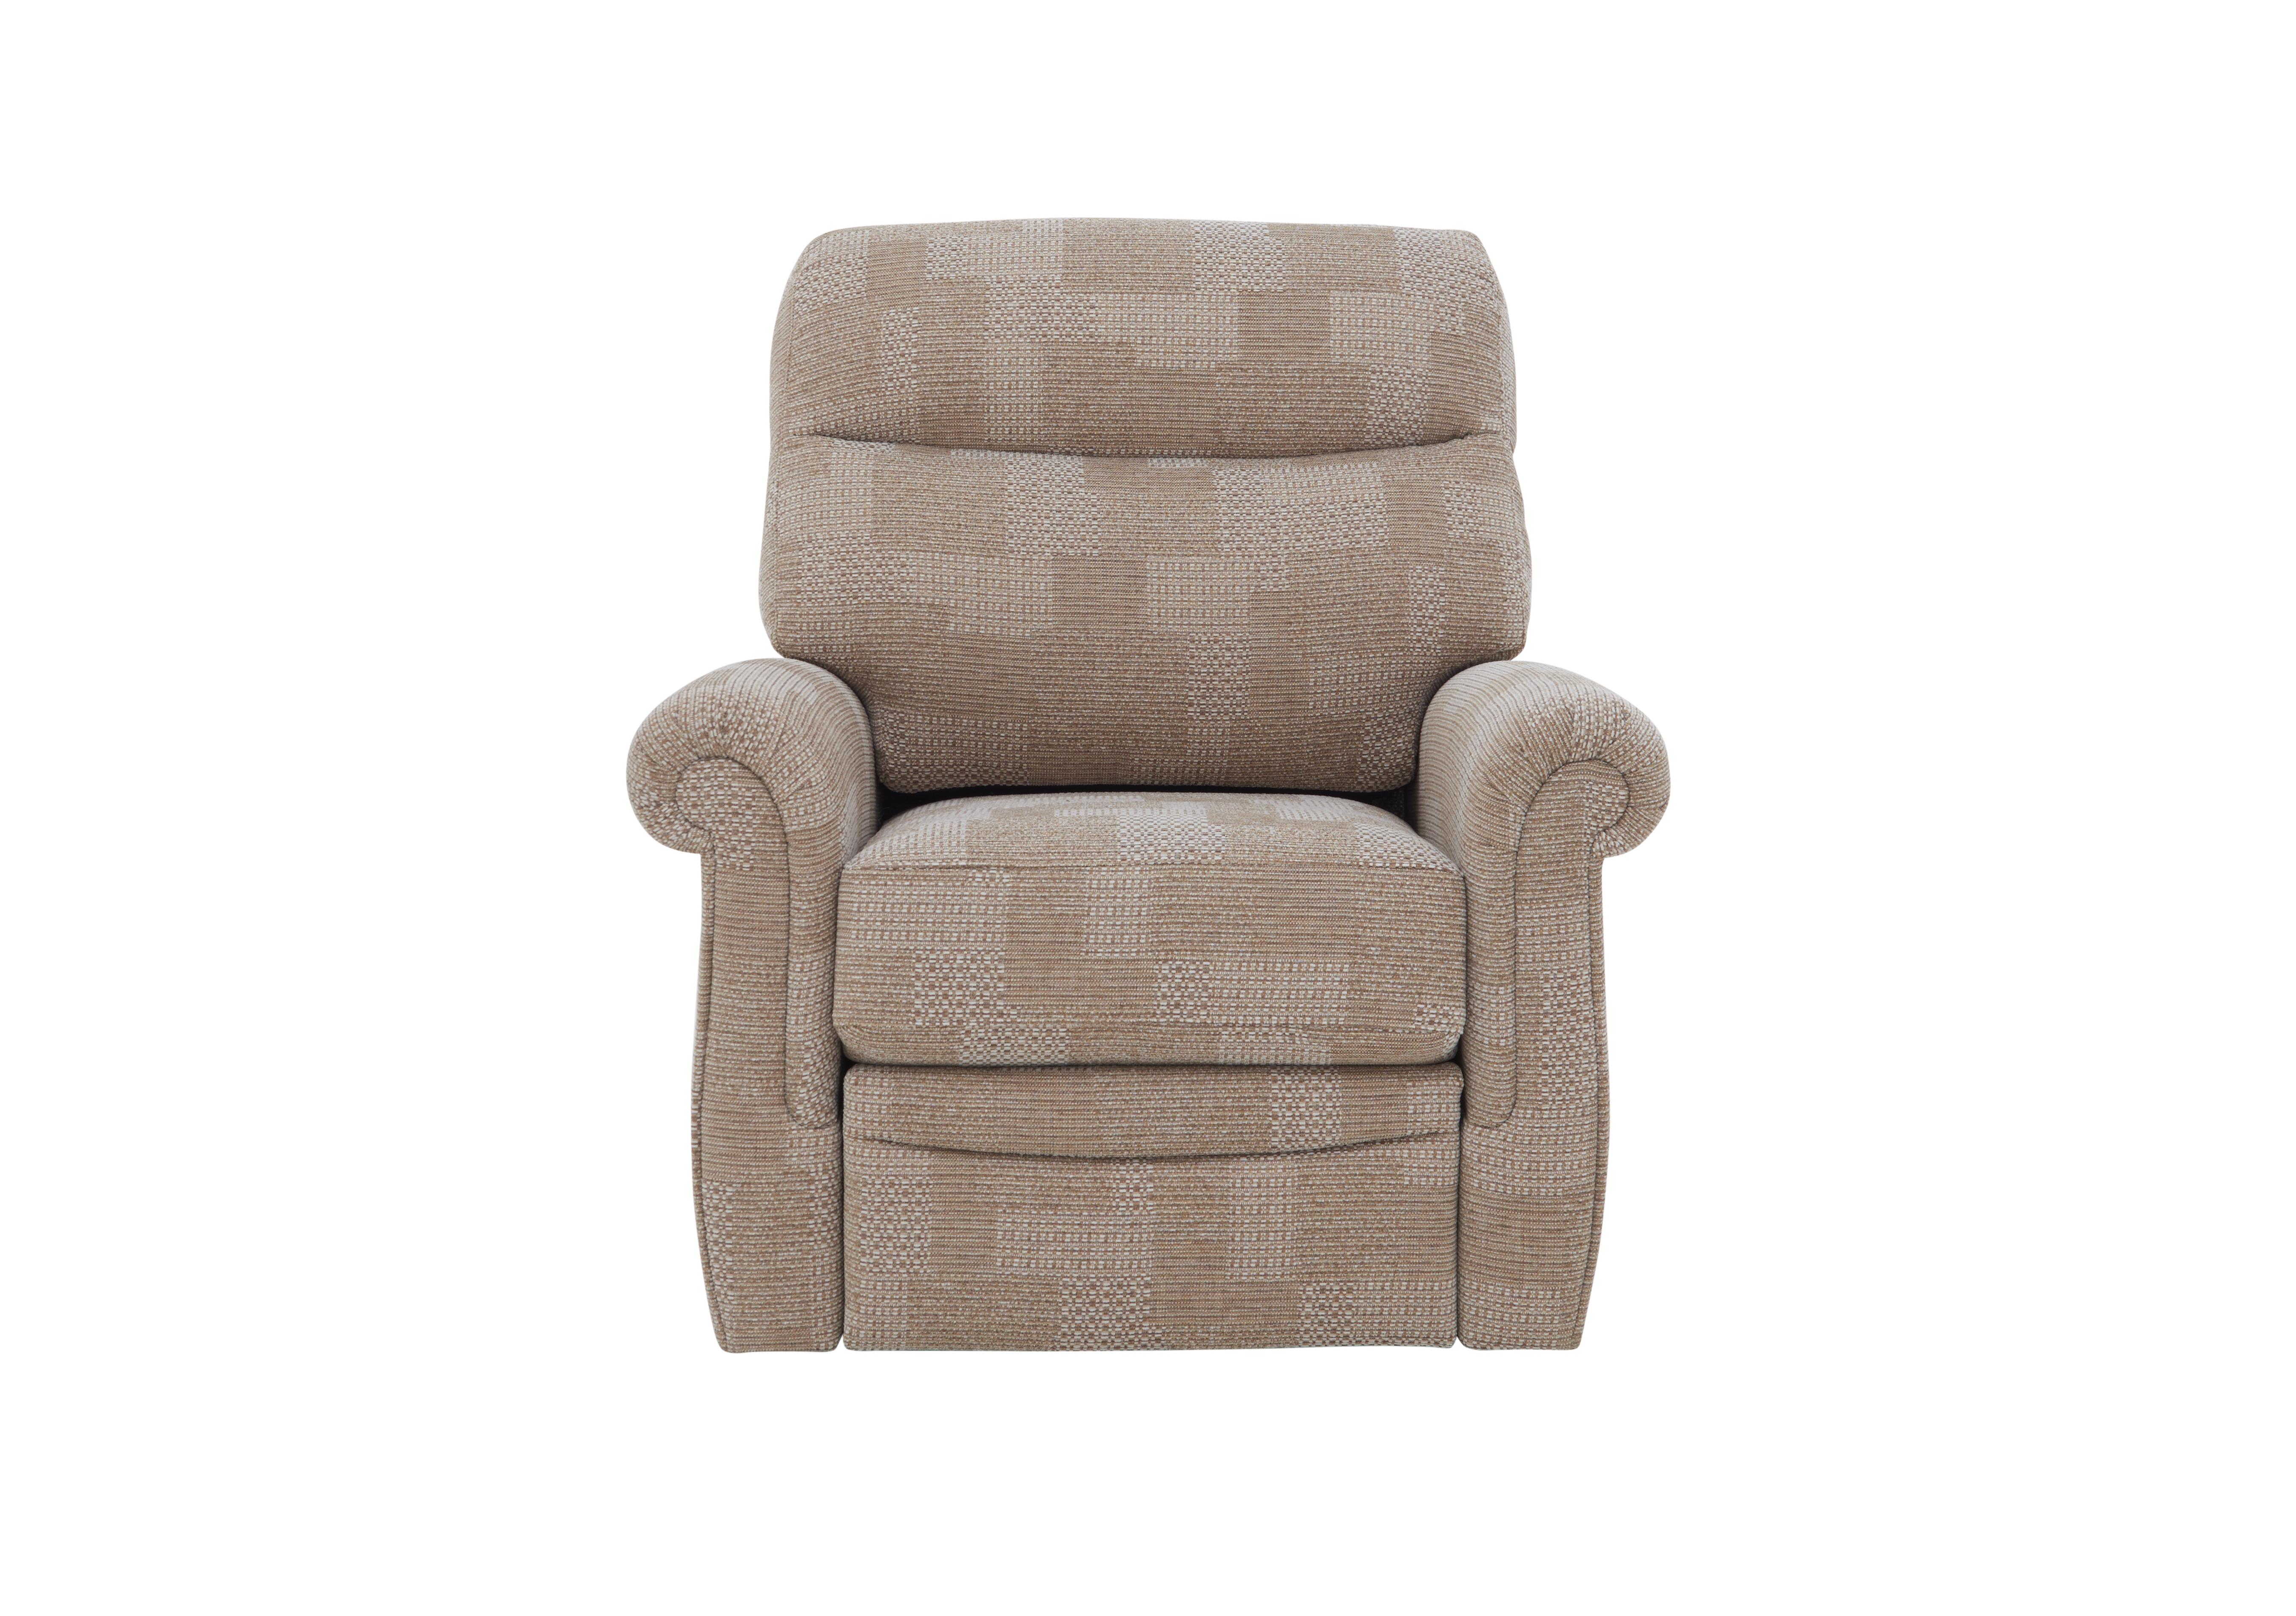 Avon Fabric Lift and Rise Armchair in A800 Faro Sand on Furniture Village